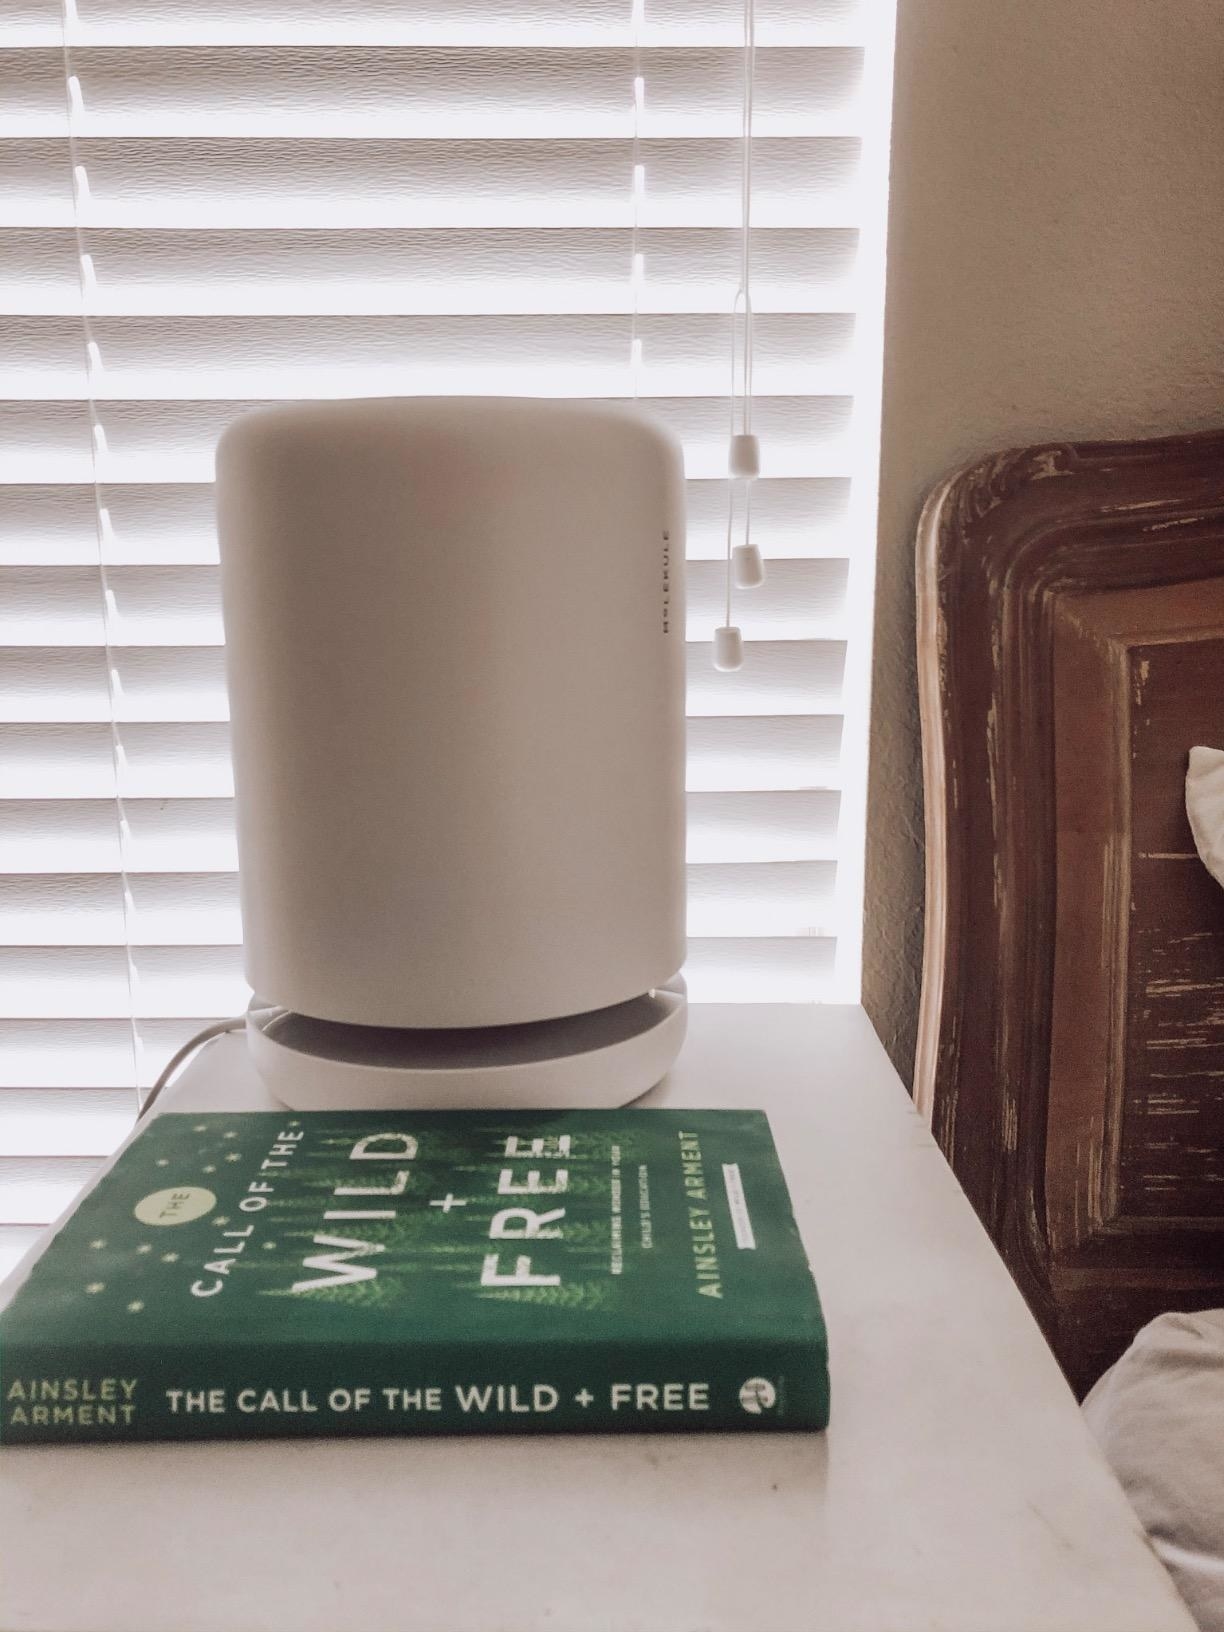 the air purifier sitting on a night stand next to a bed